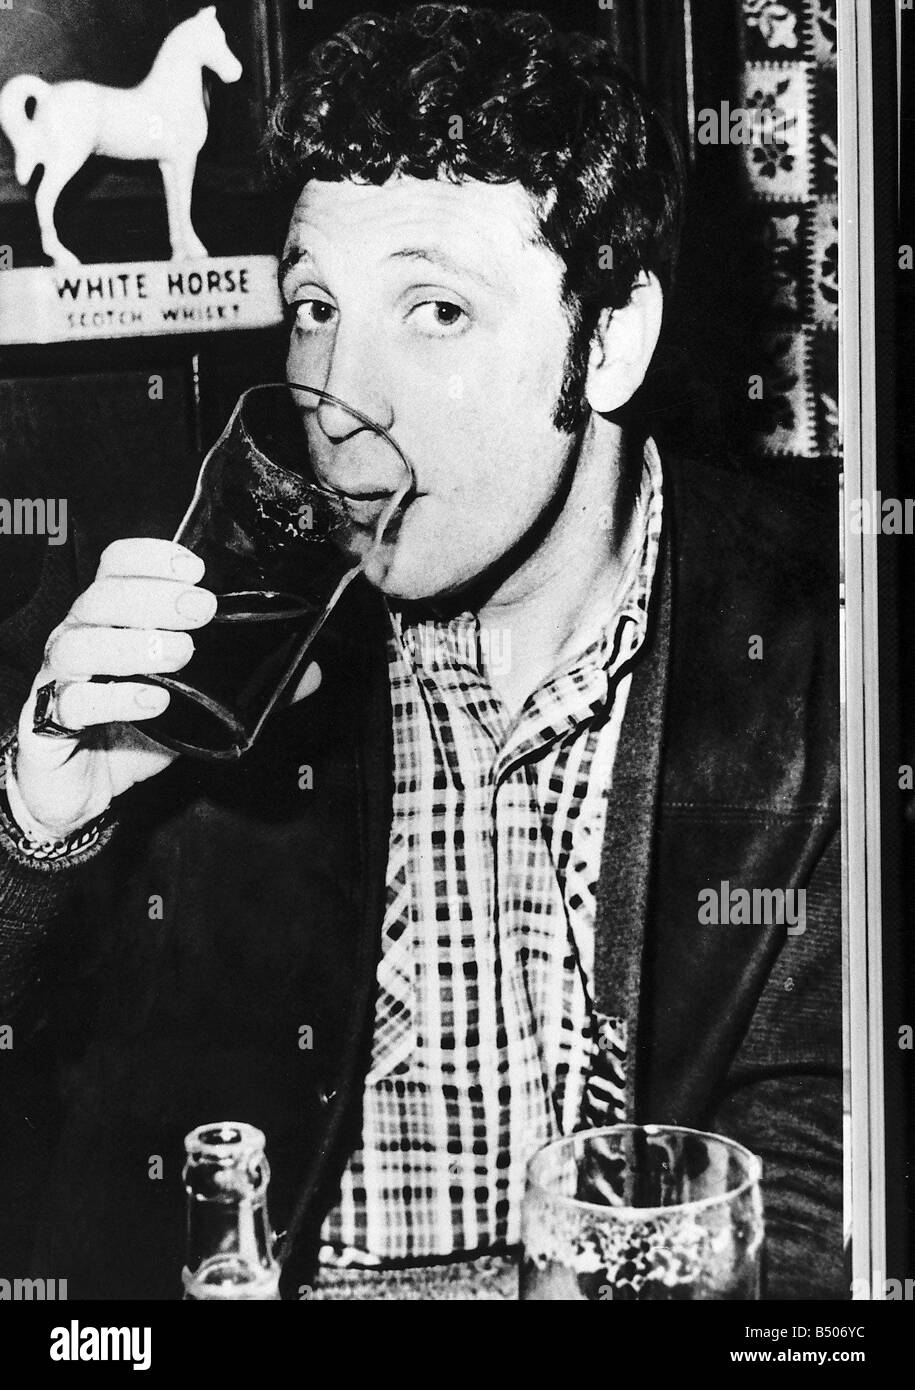 Tom jones the singer in his local pub in wales Stock Photo